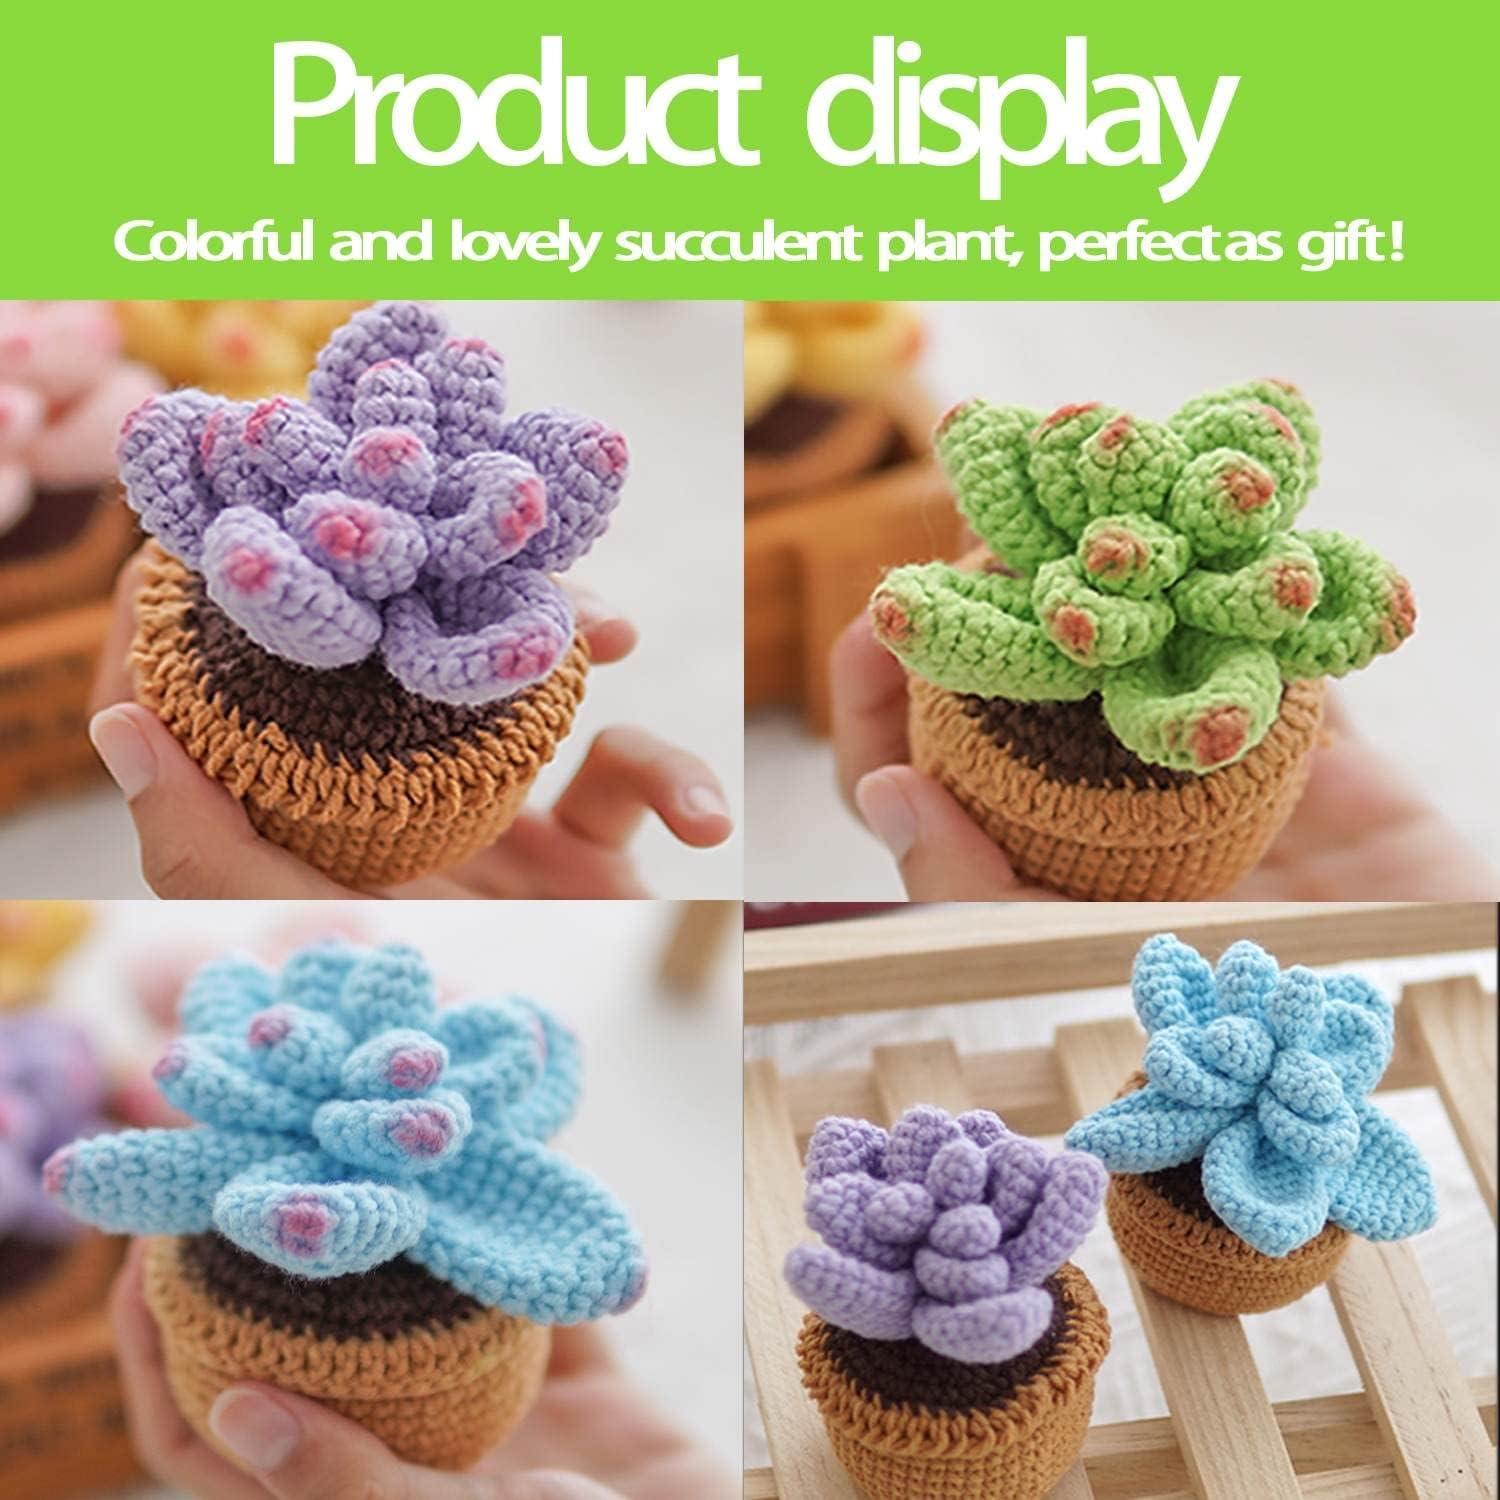 New Crochet Kit for Beginners, 6 Pcs Potted Flowers Crochet Kit, Crochet  Starter Knitting Kit for Complete Beginners with Step-by-Step Instructions